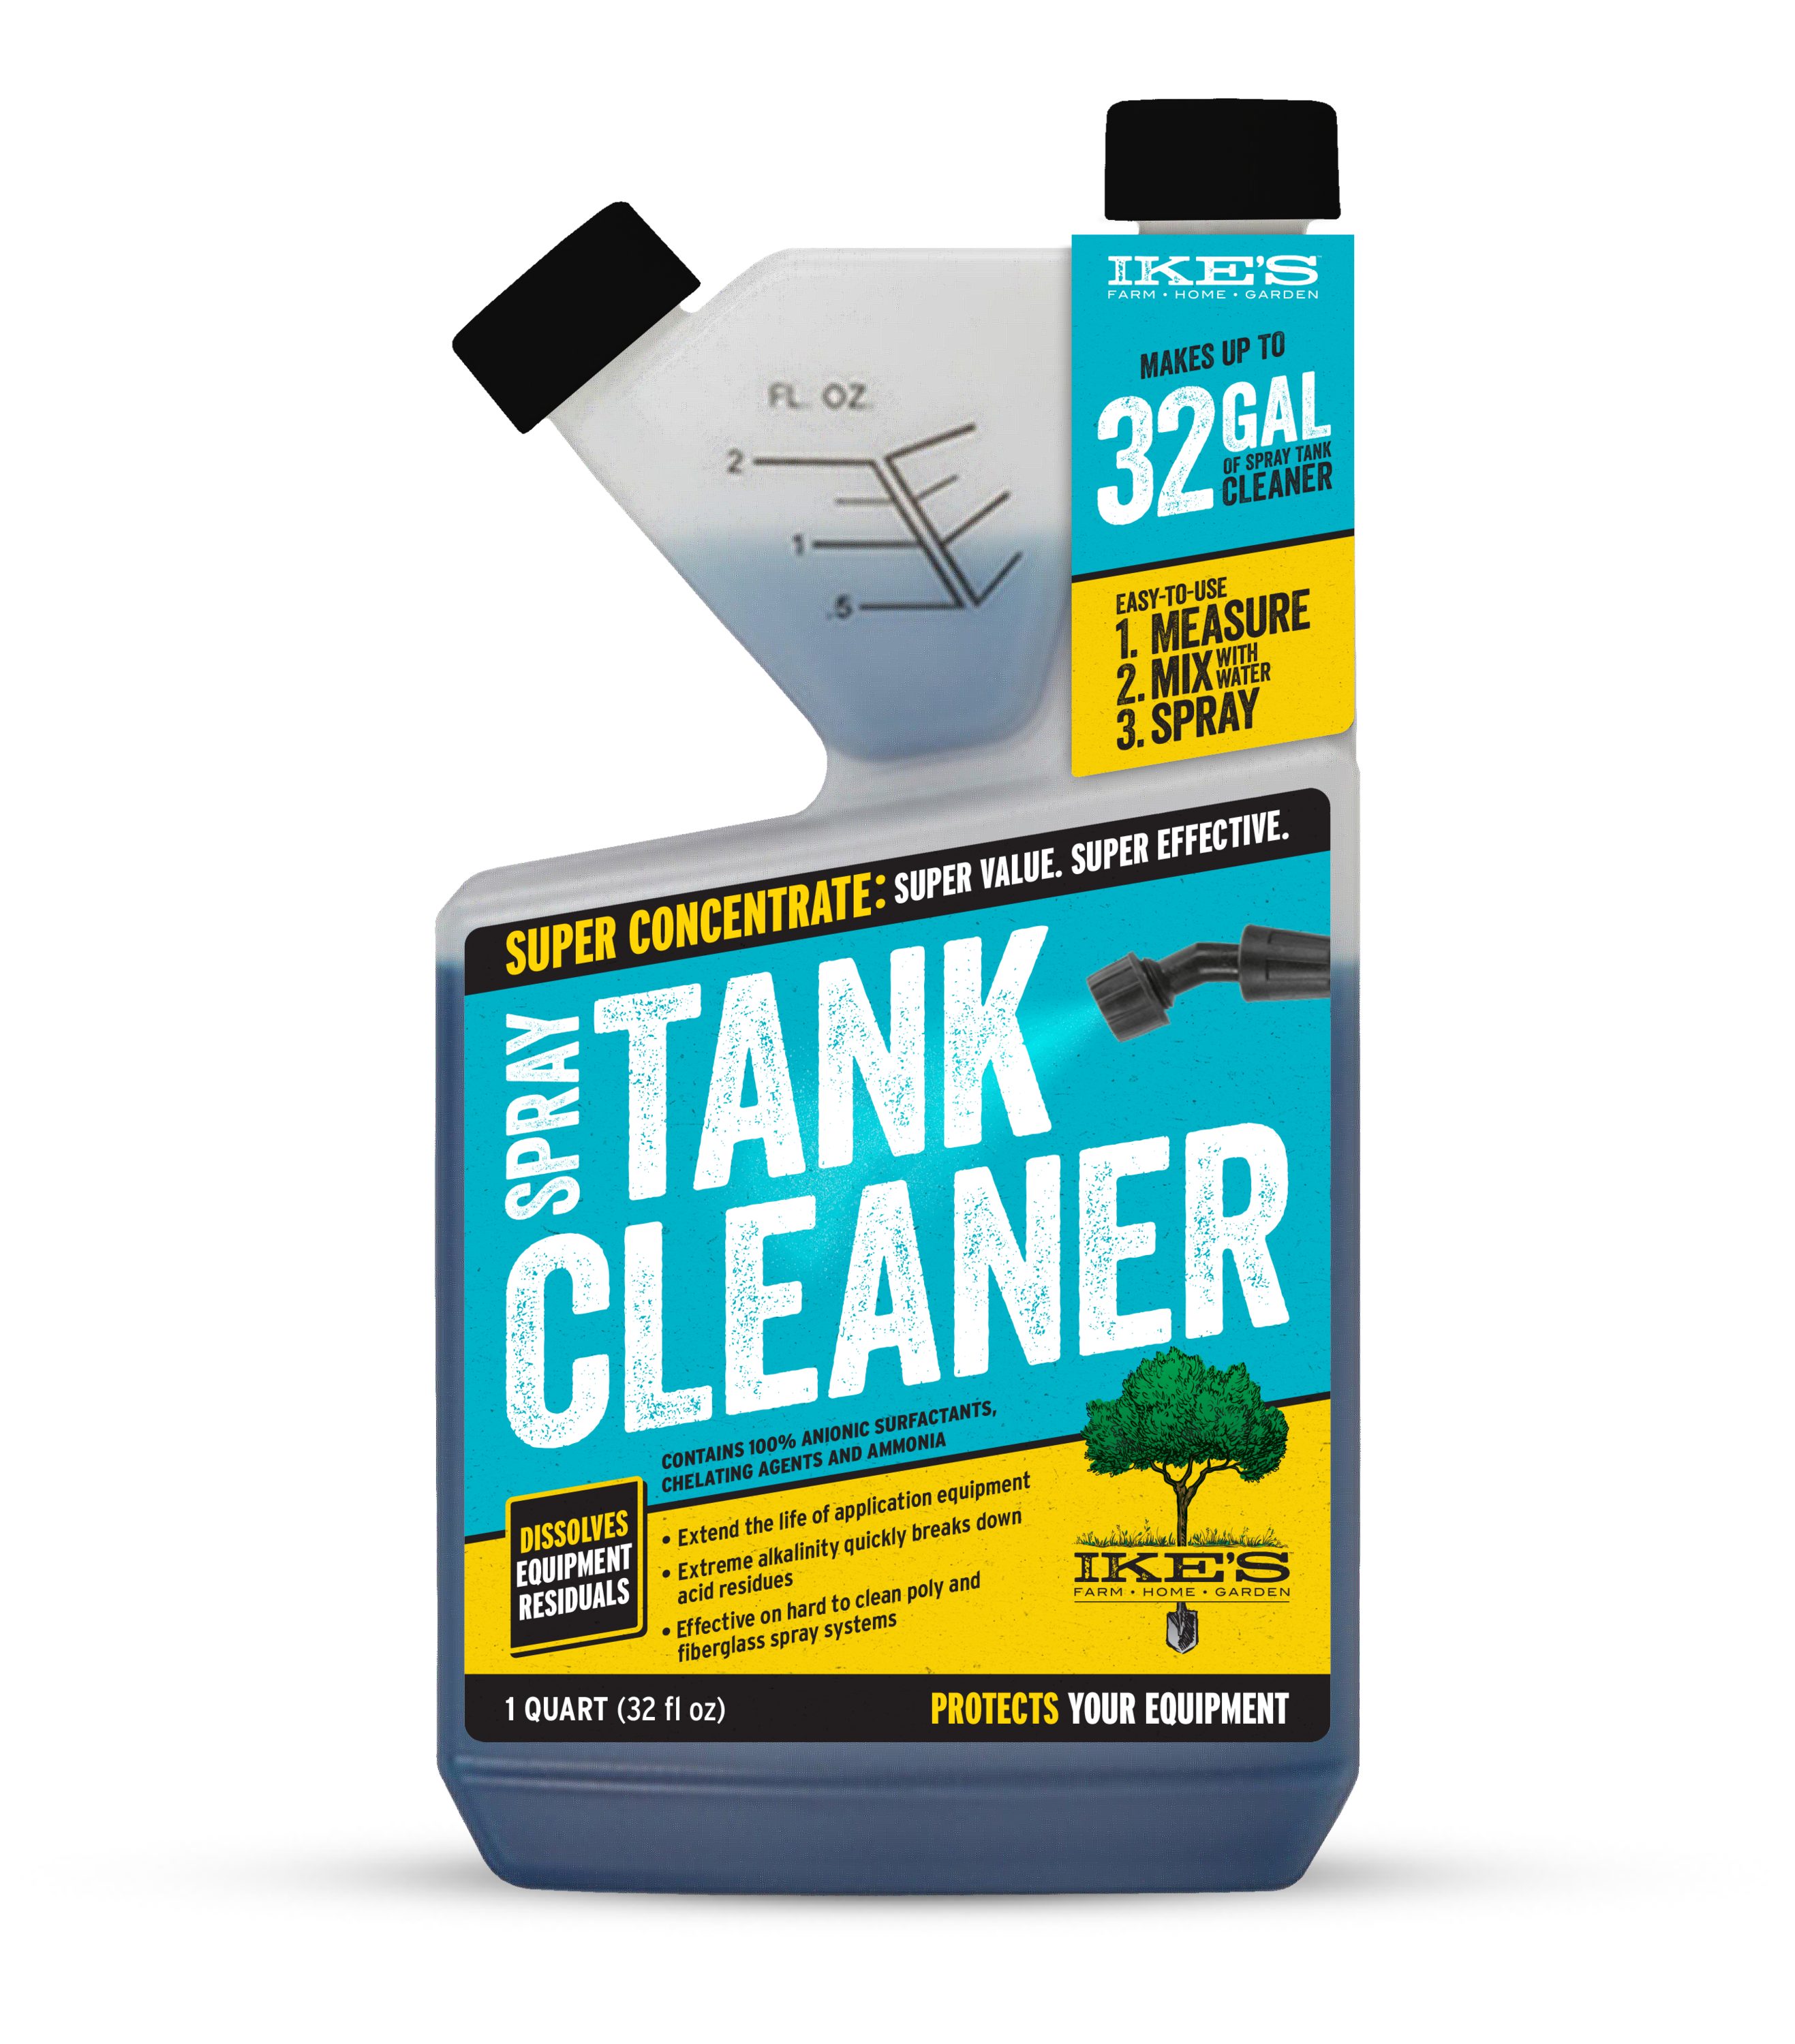 Gas Tank Cleaner Fuel Tank Cleaner Quart Size